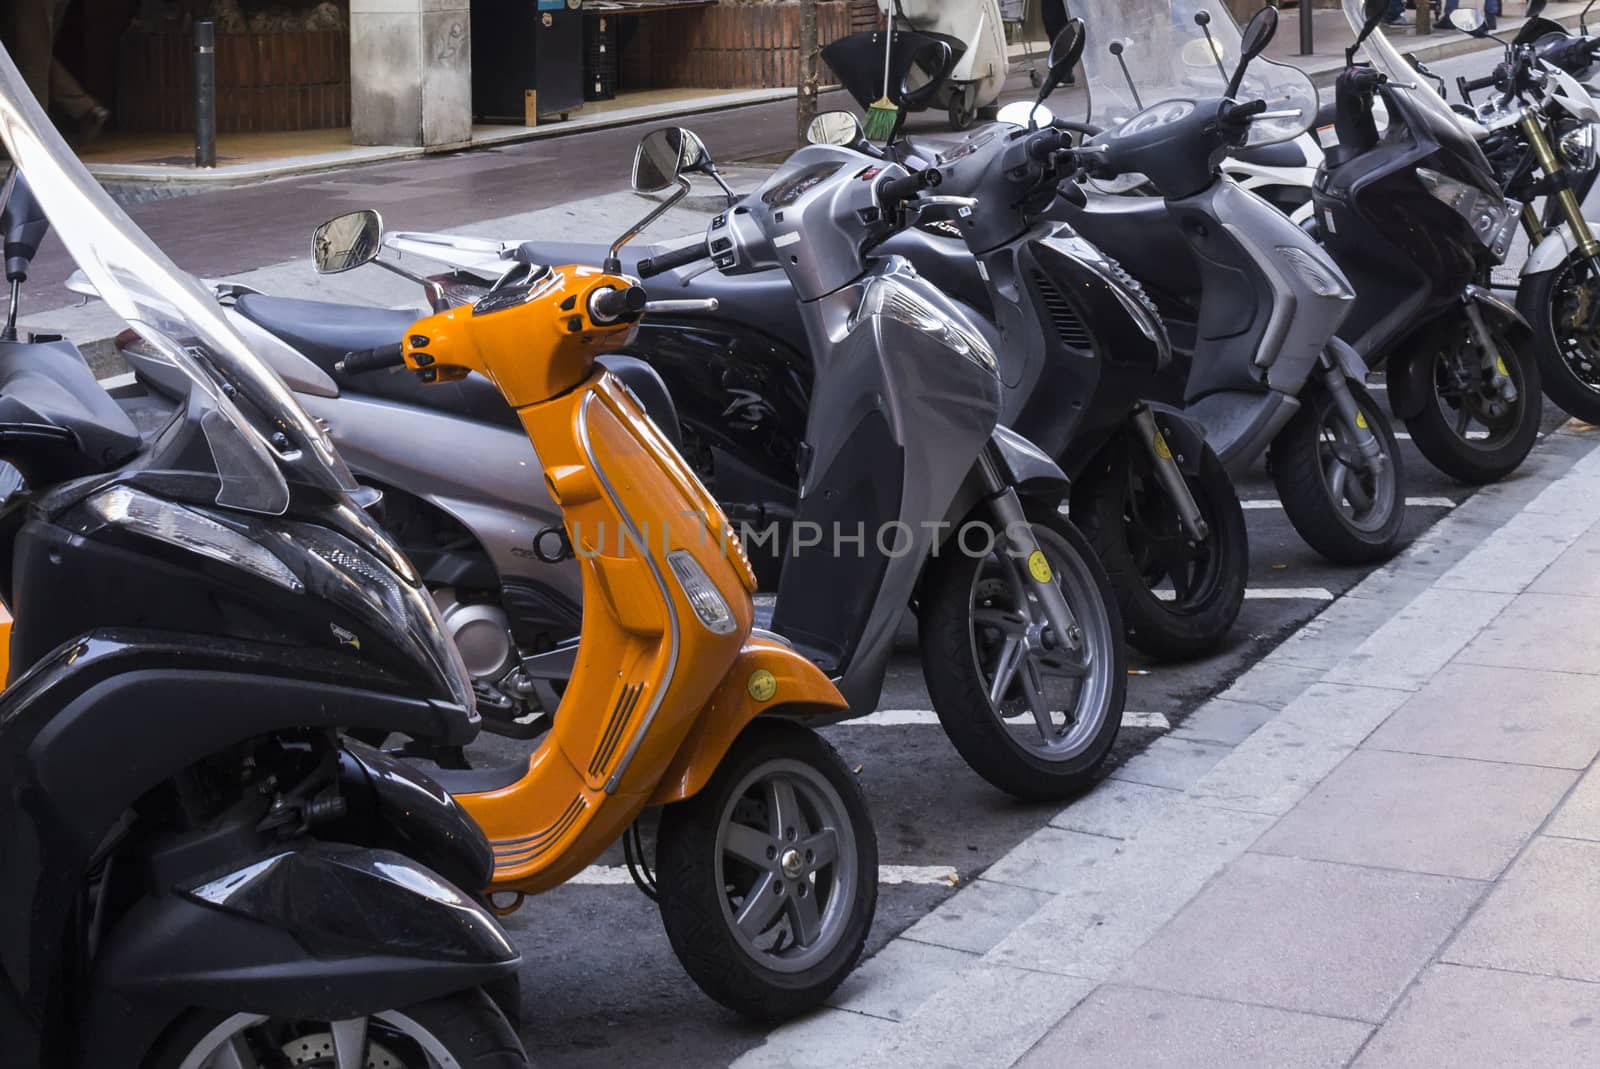 Many scooters on street, one of which is orange, and others are gray.